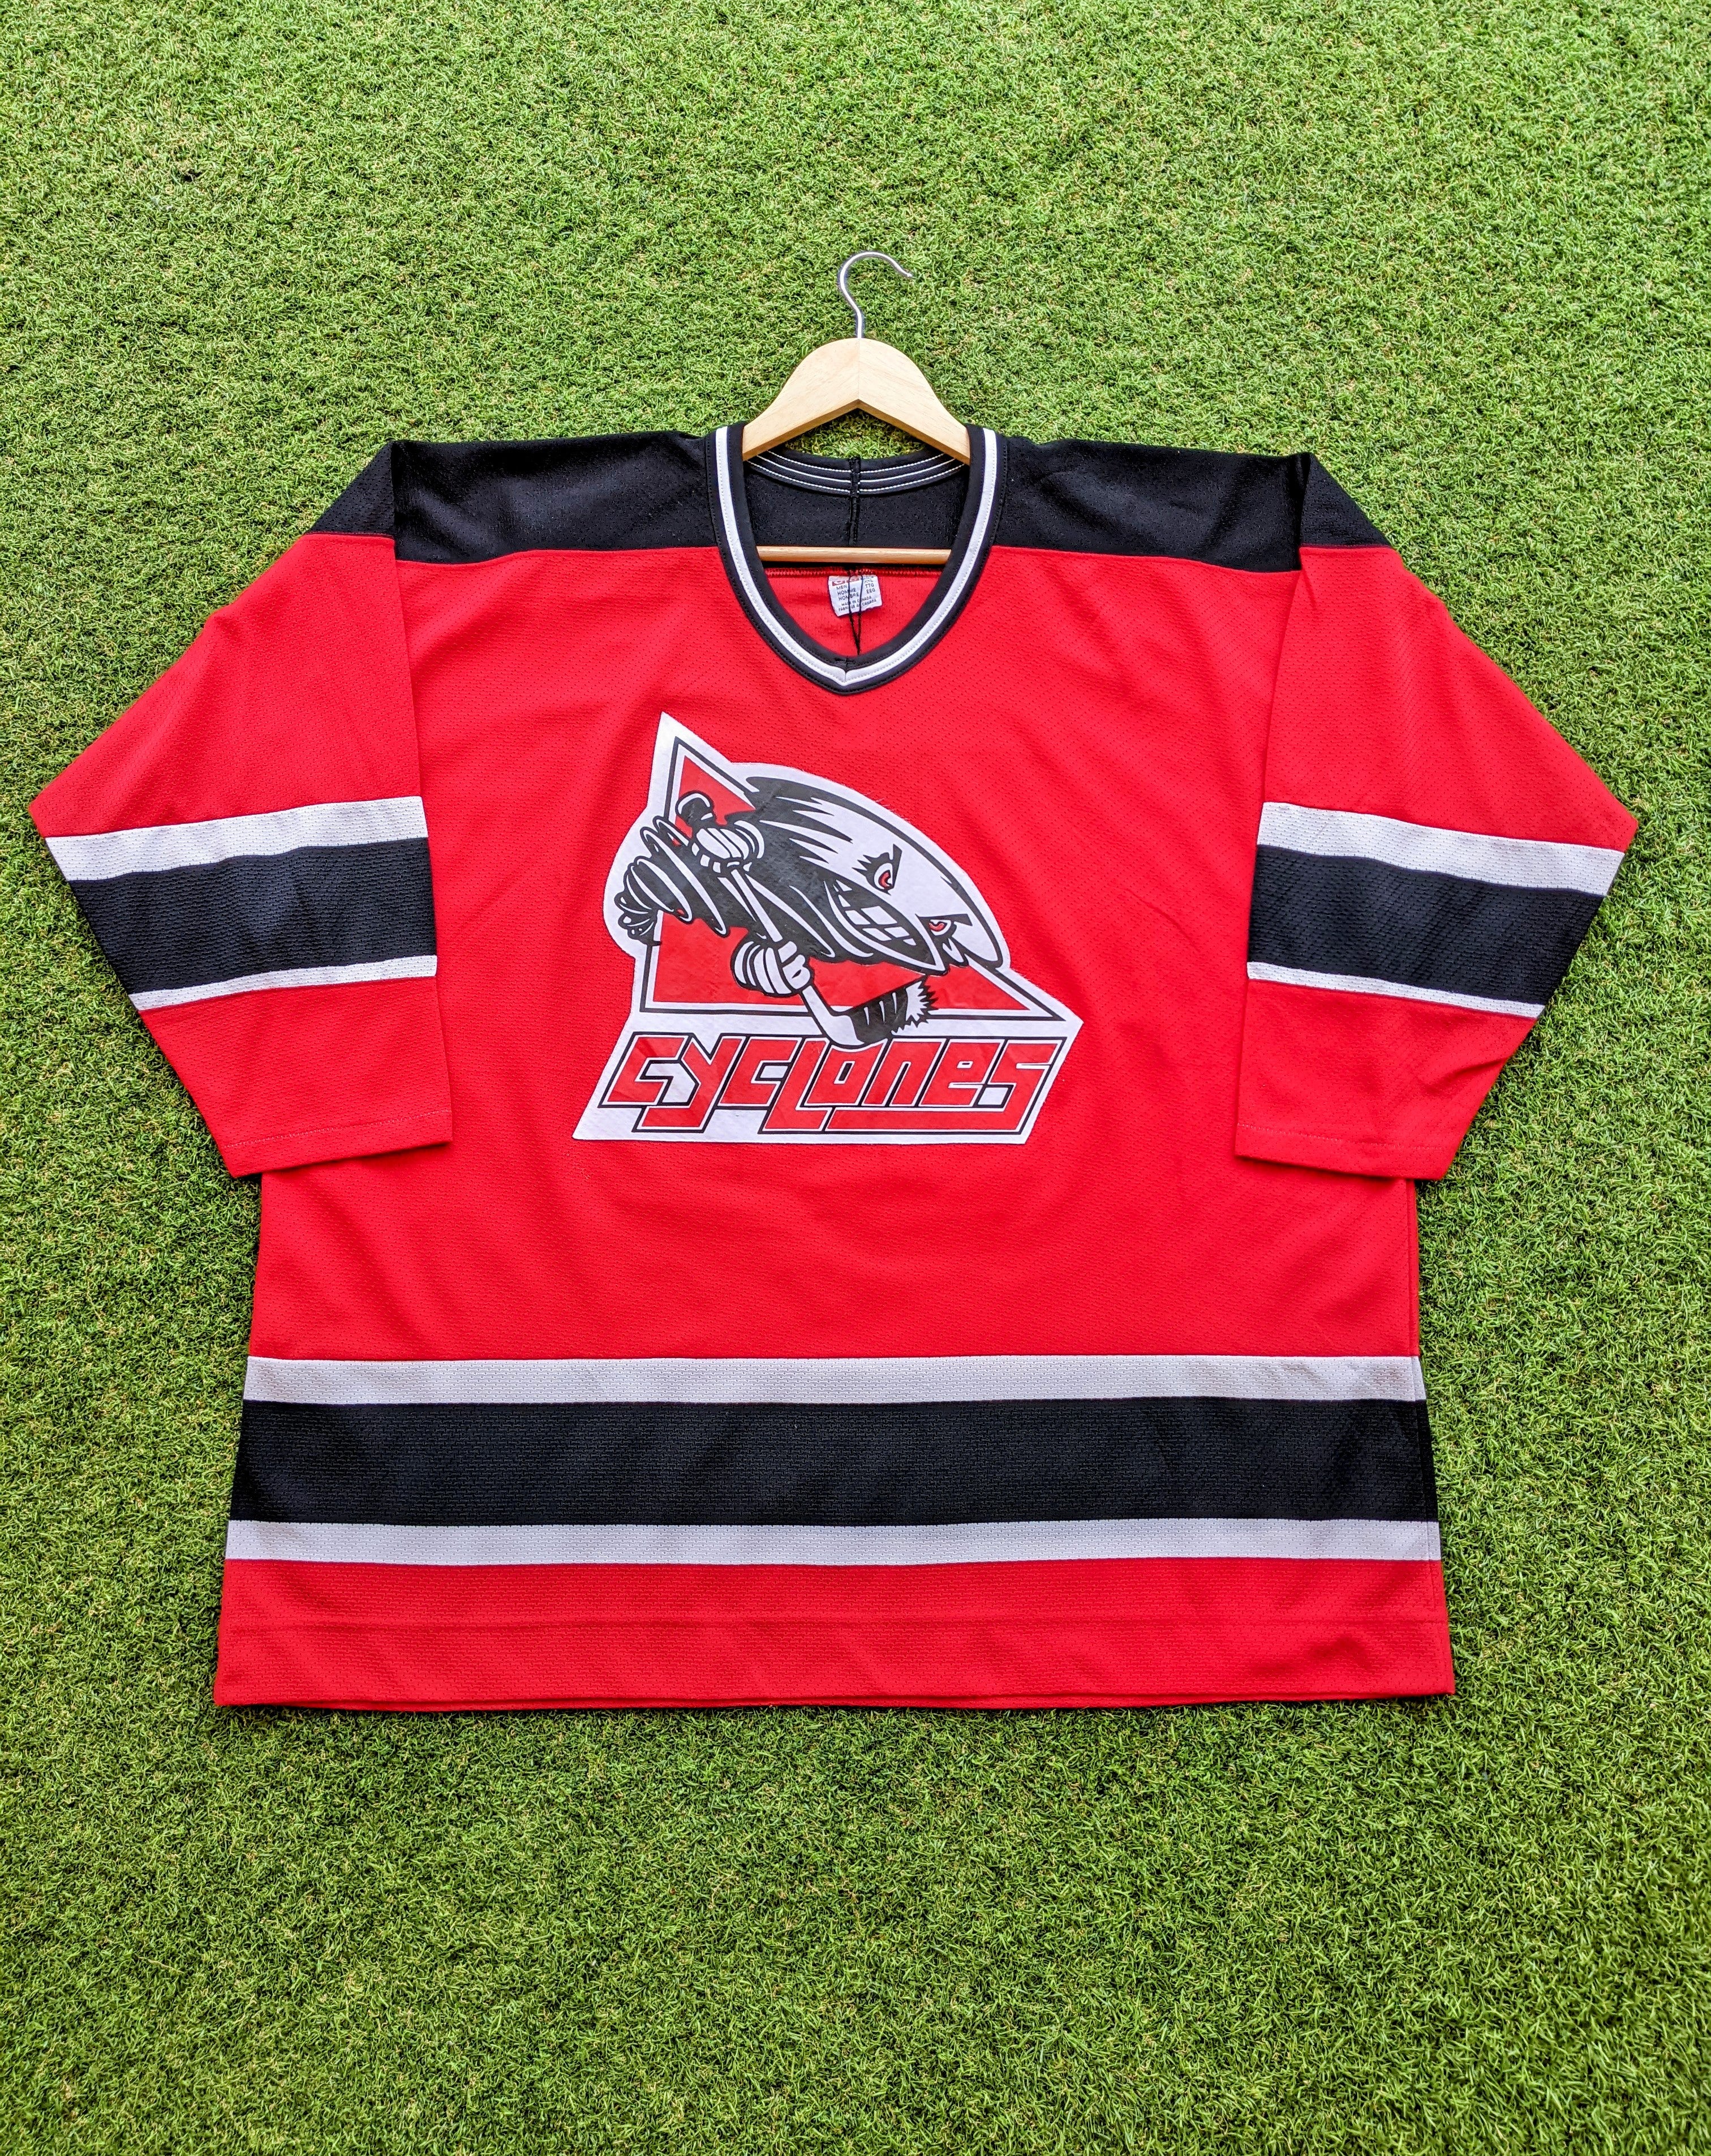 Cyclones 44 Red Jersey